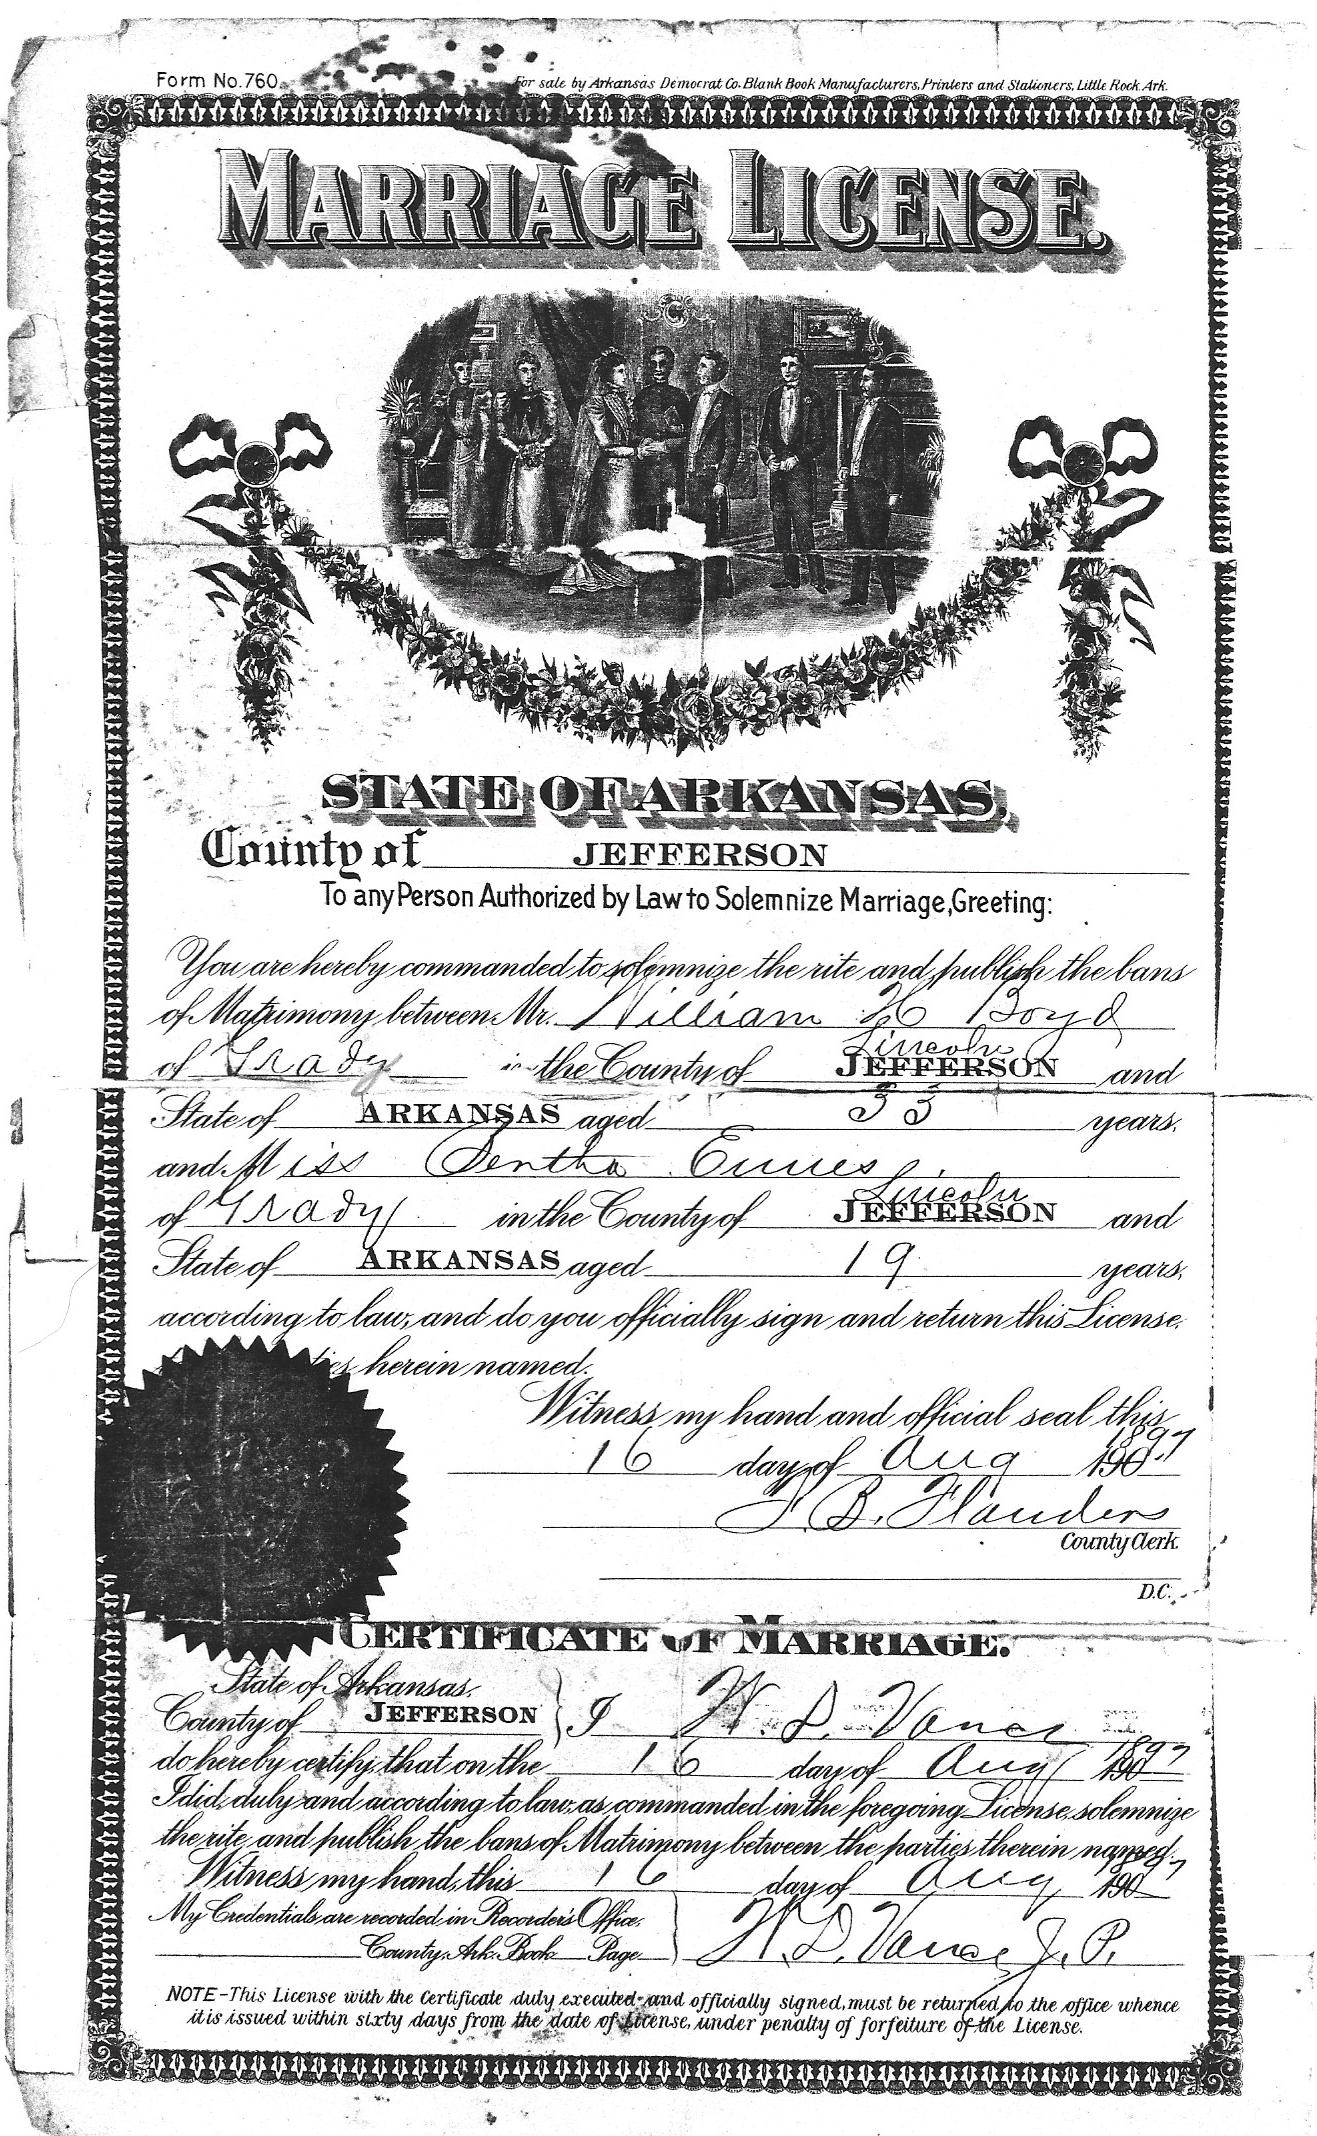 Marriage license of William H. Boyd and Bertha Ennes